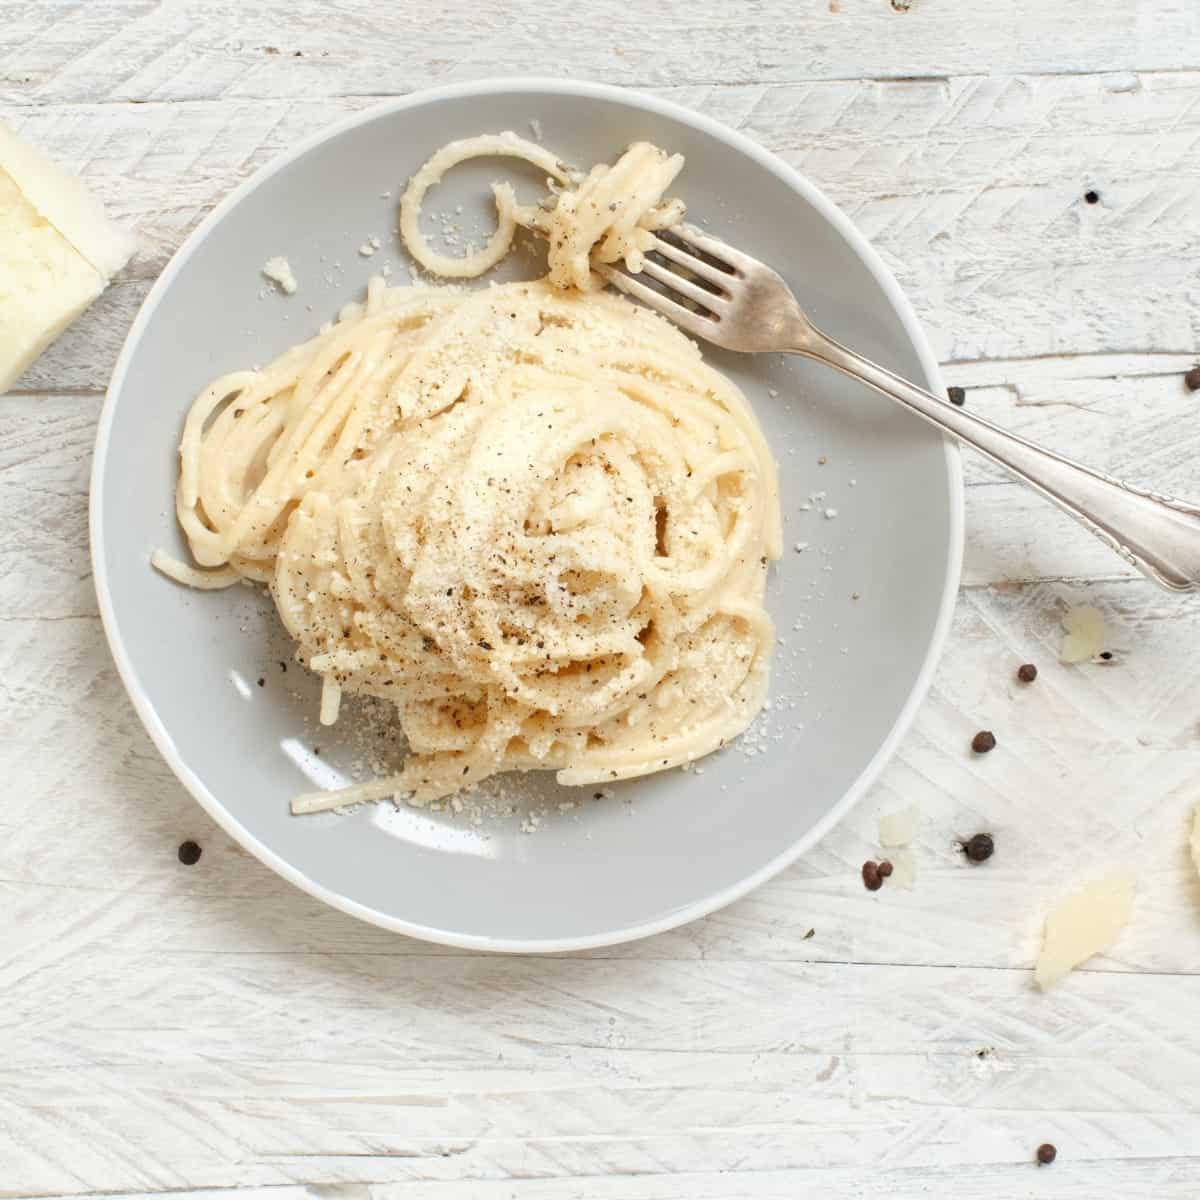 butter spaghetti noodles on a gray plate